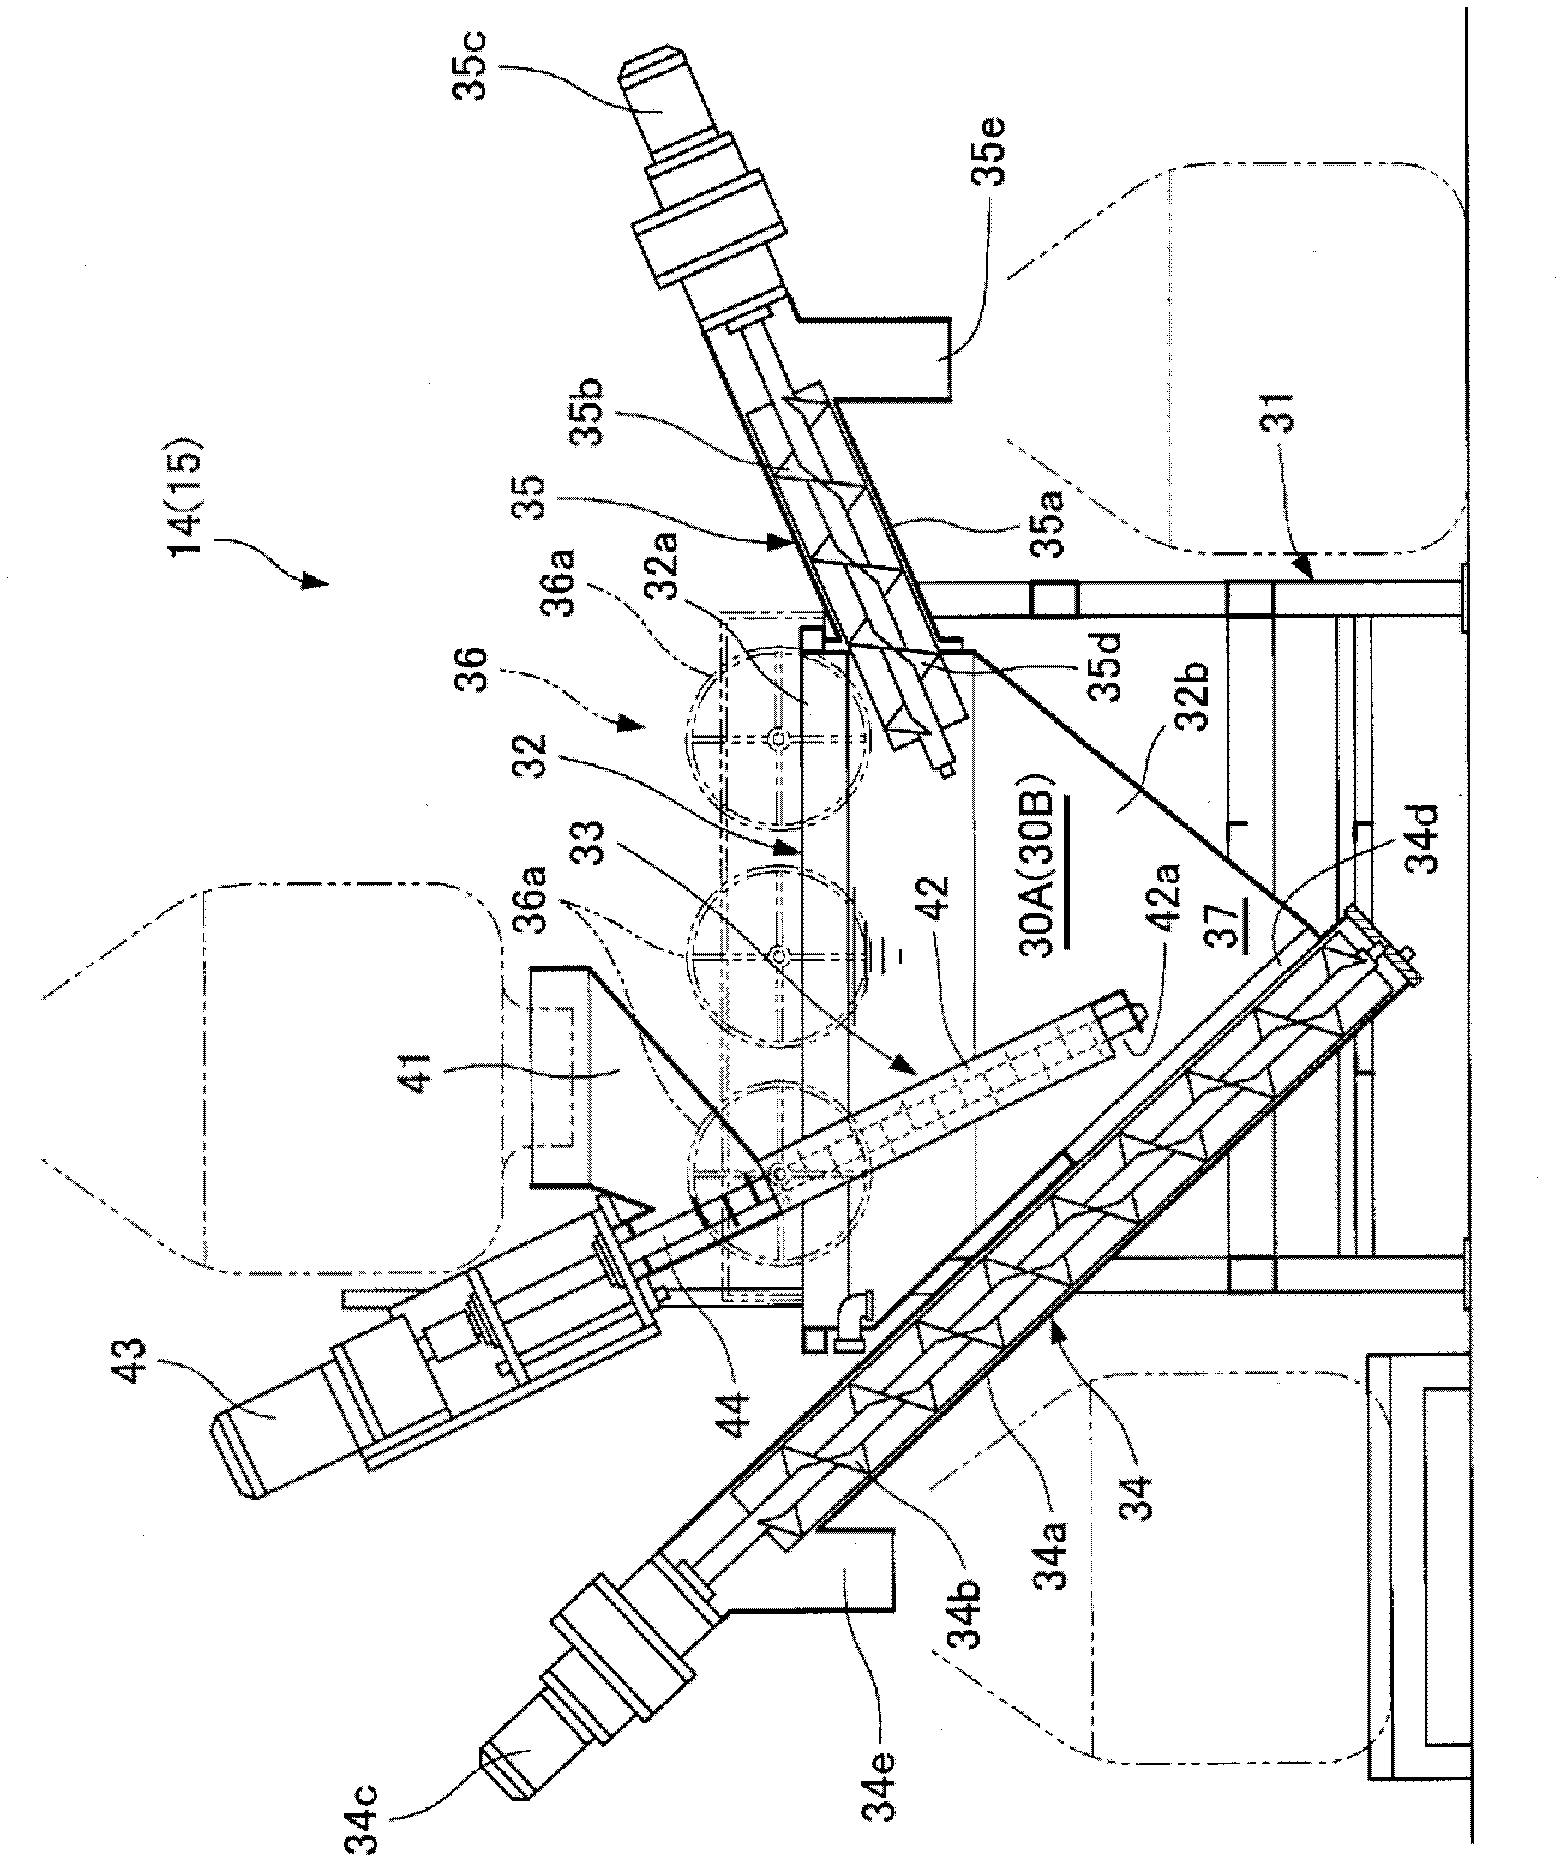 Method and facility for sorting and separating waste plastic